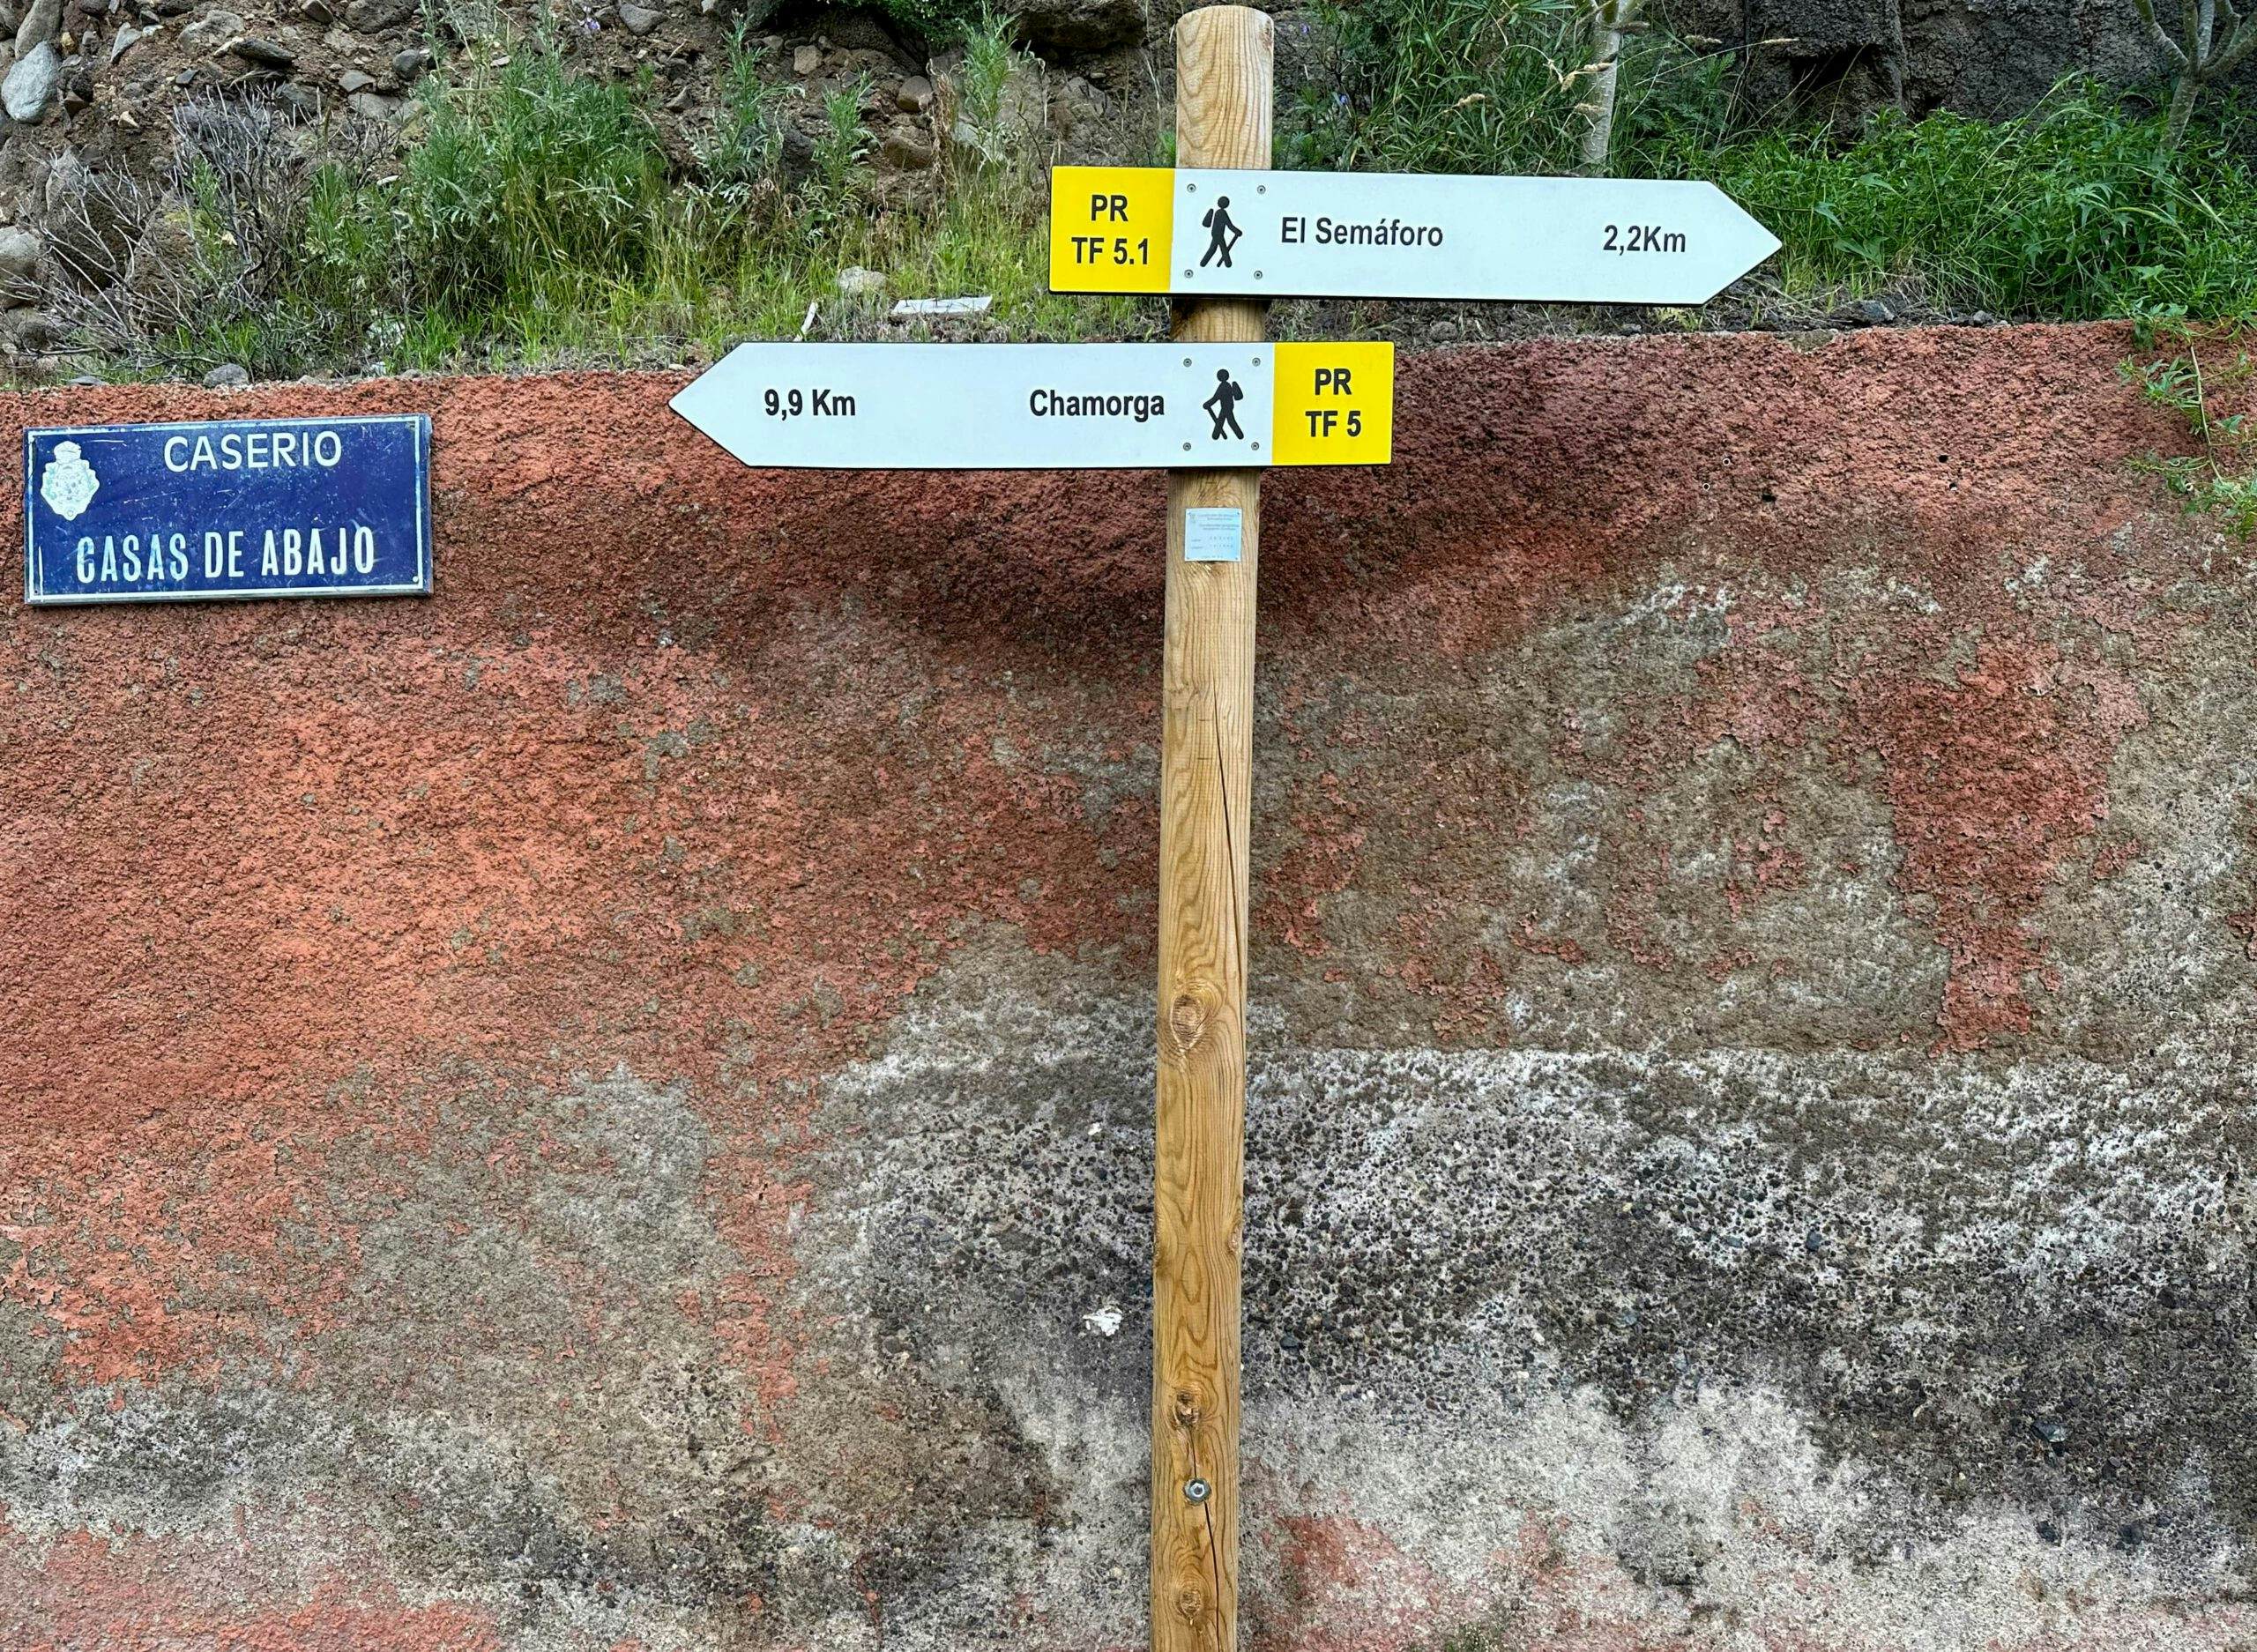 Signposting in Igueste TF 5.1 direction Wl Semáforo - follow this road for a while.